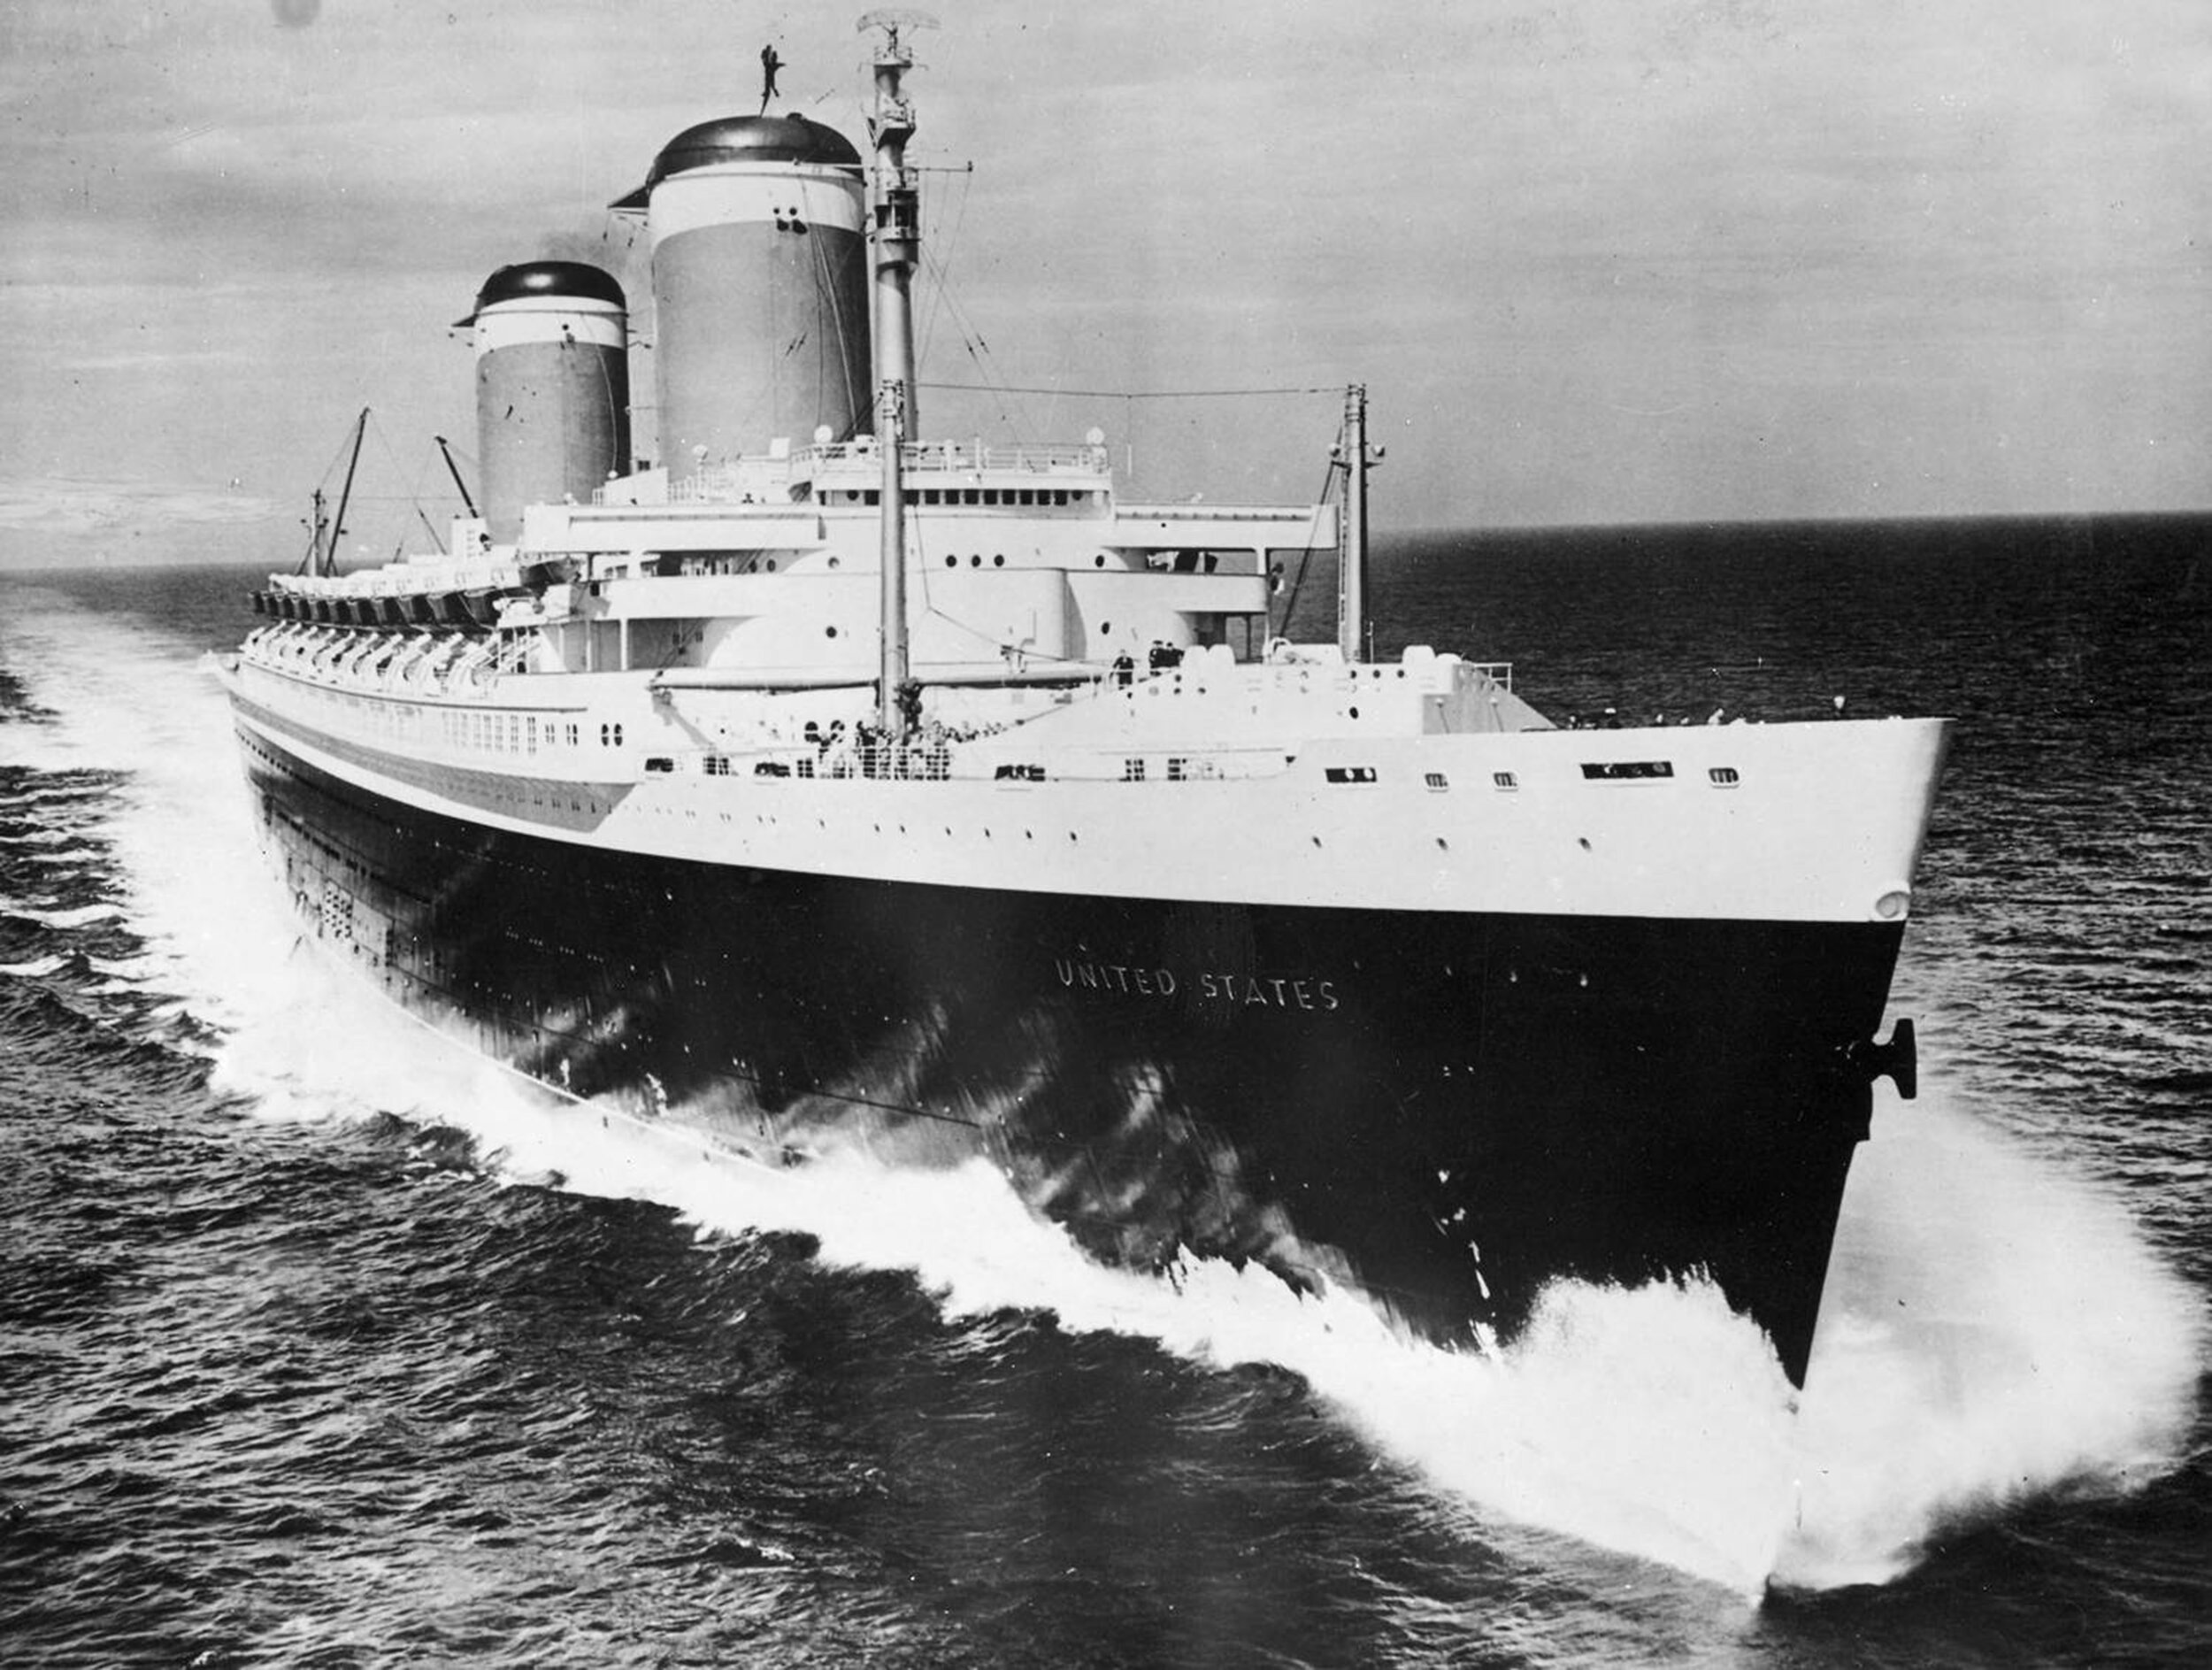 The SS United States during her speed trials